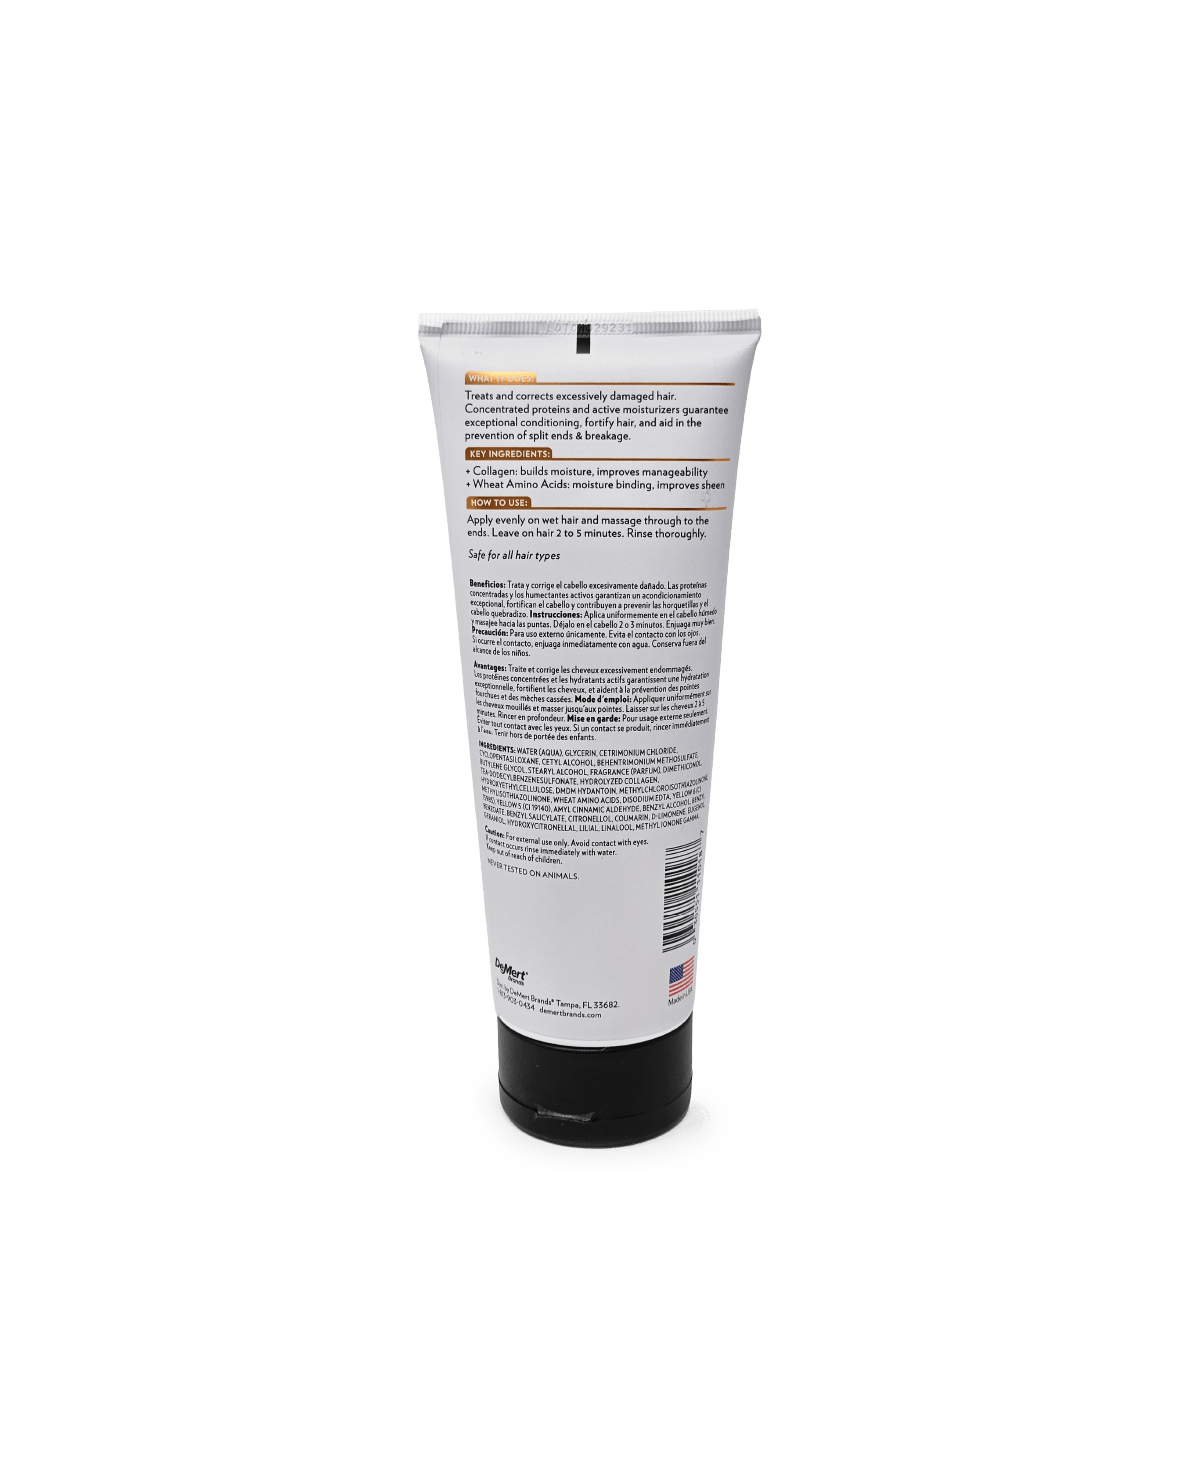 Hi-Pro-Pac Extremely Damaged Hair Repair Protein Treatment